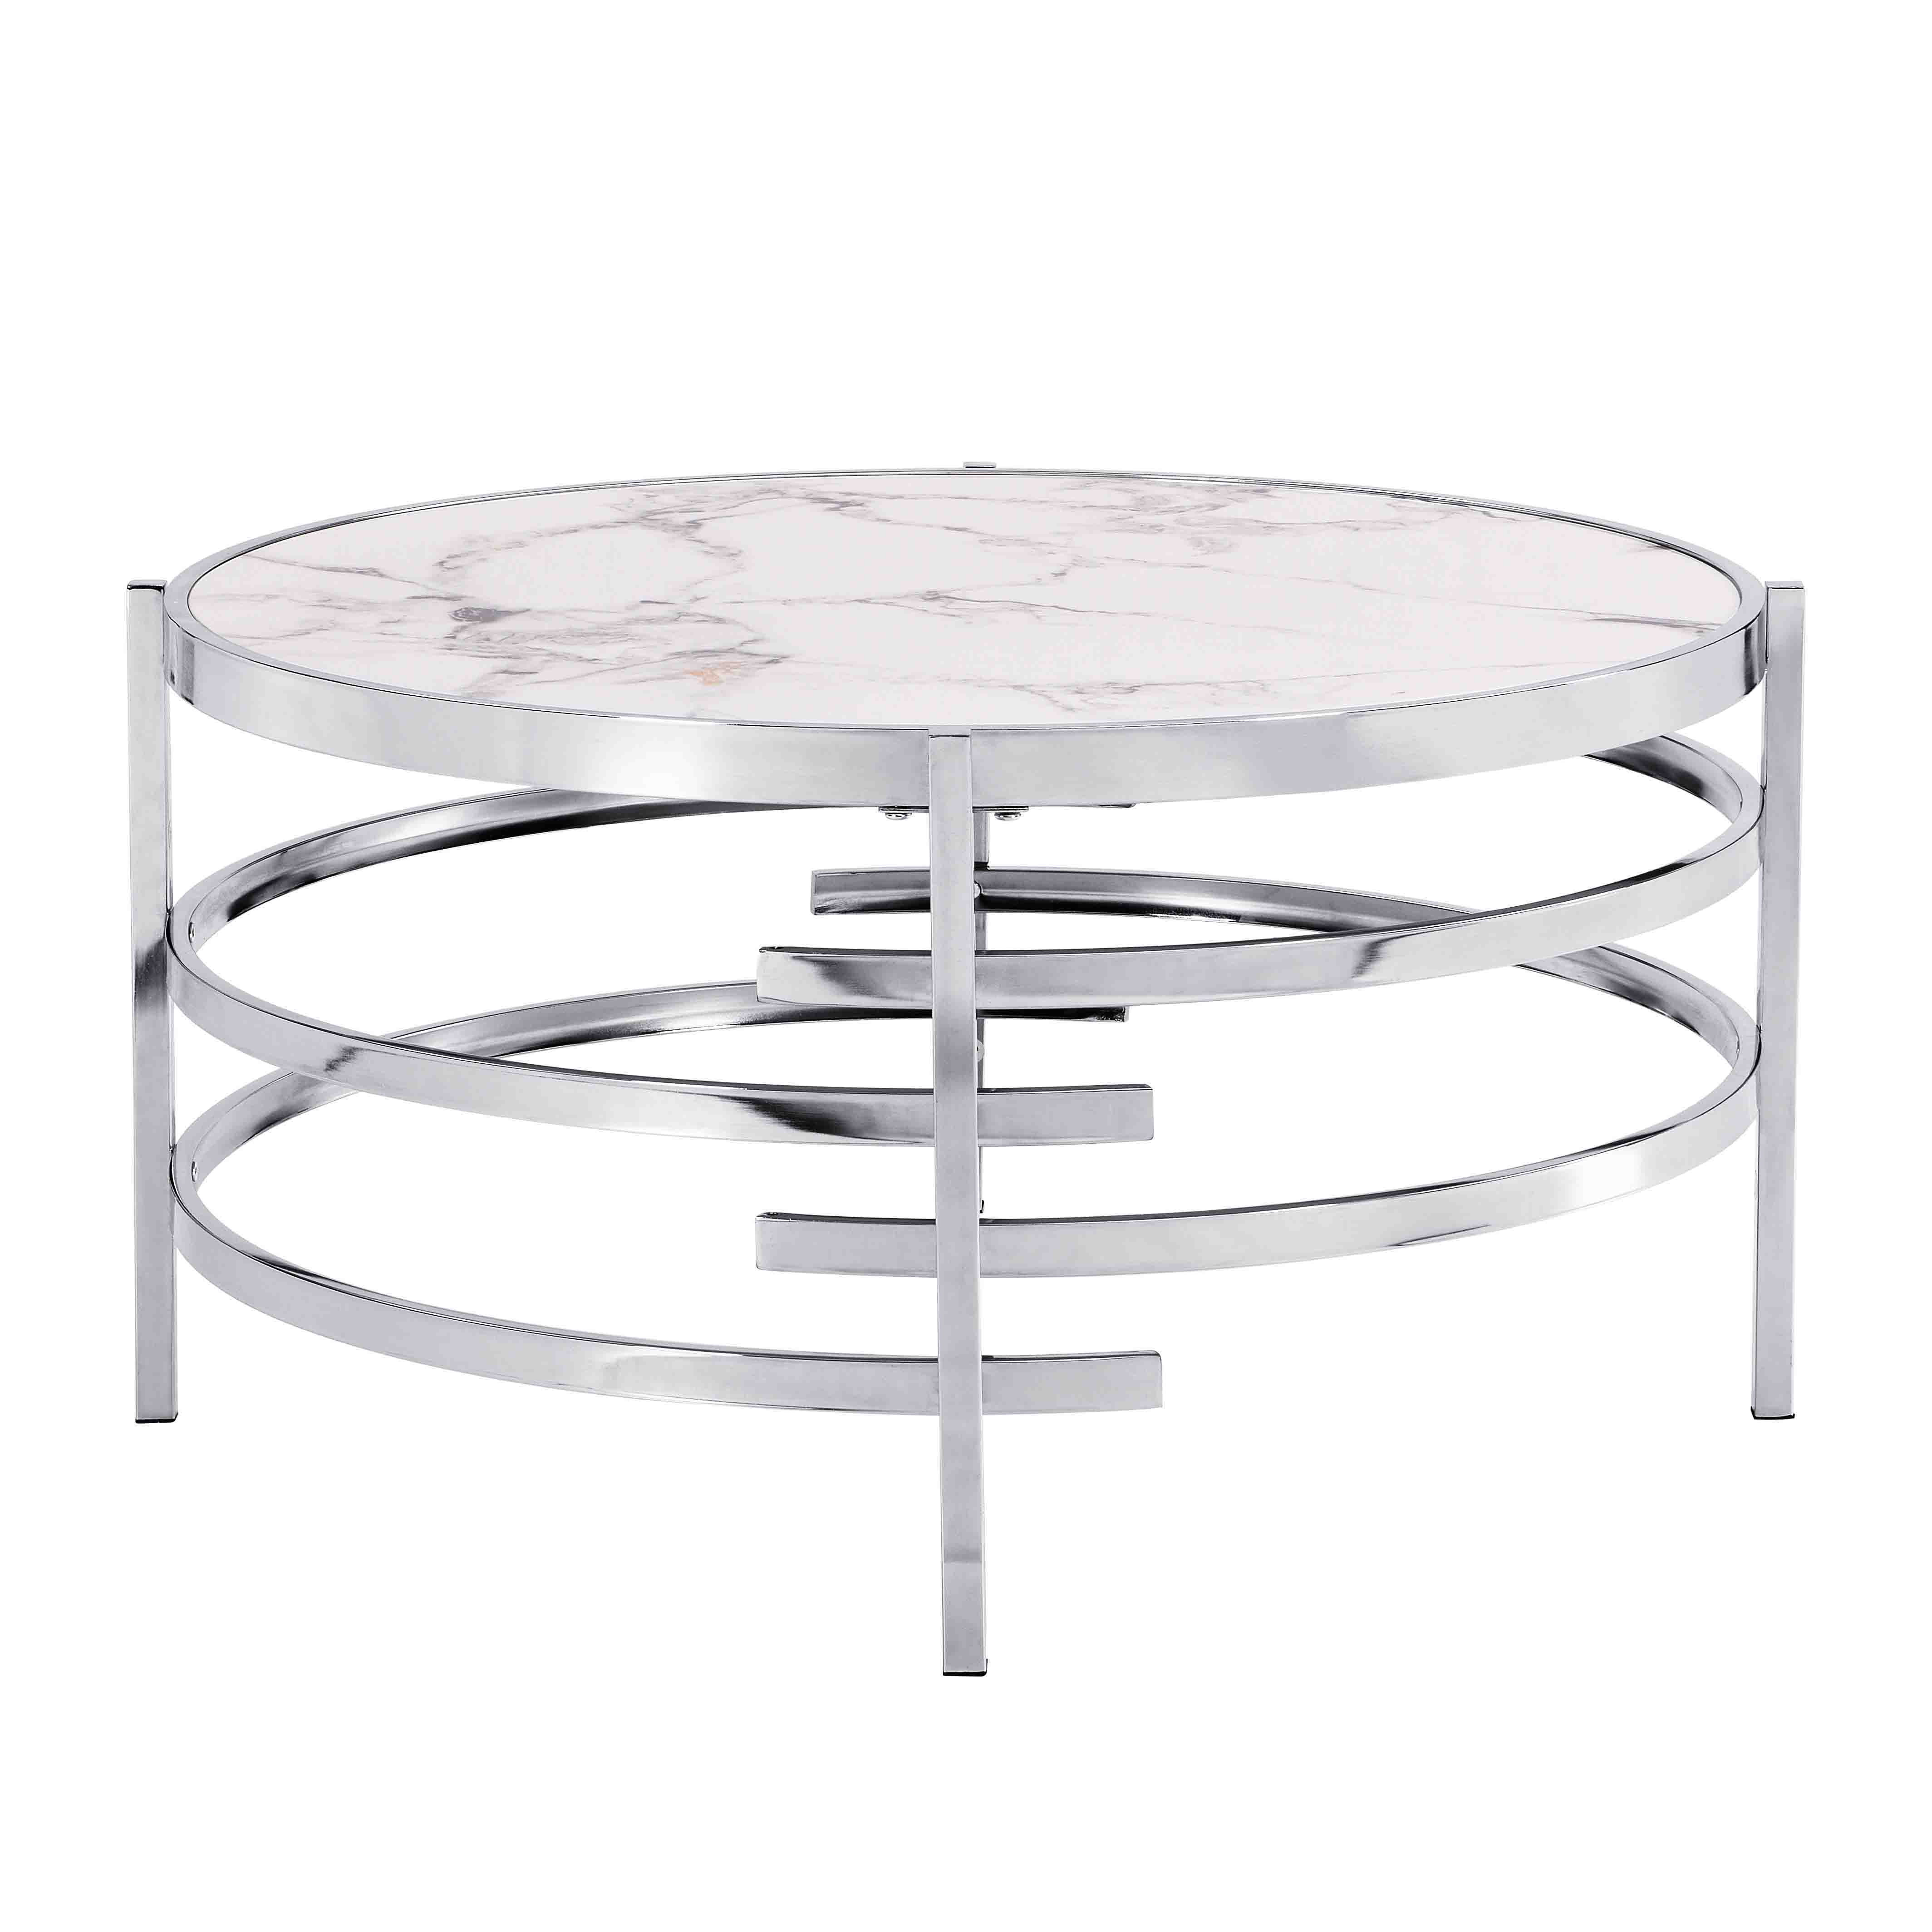 32.48'' Chrome Round Coffee Table With Sintered Stone Top&Sturdy Metal Frame, Modern Coffee Table For Living Room - Silver